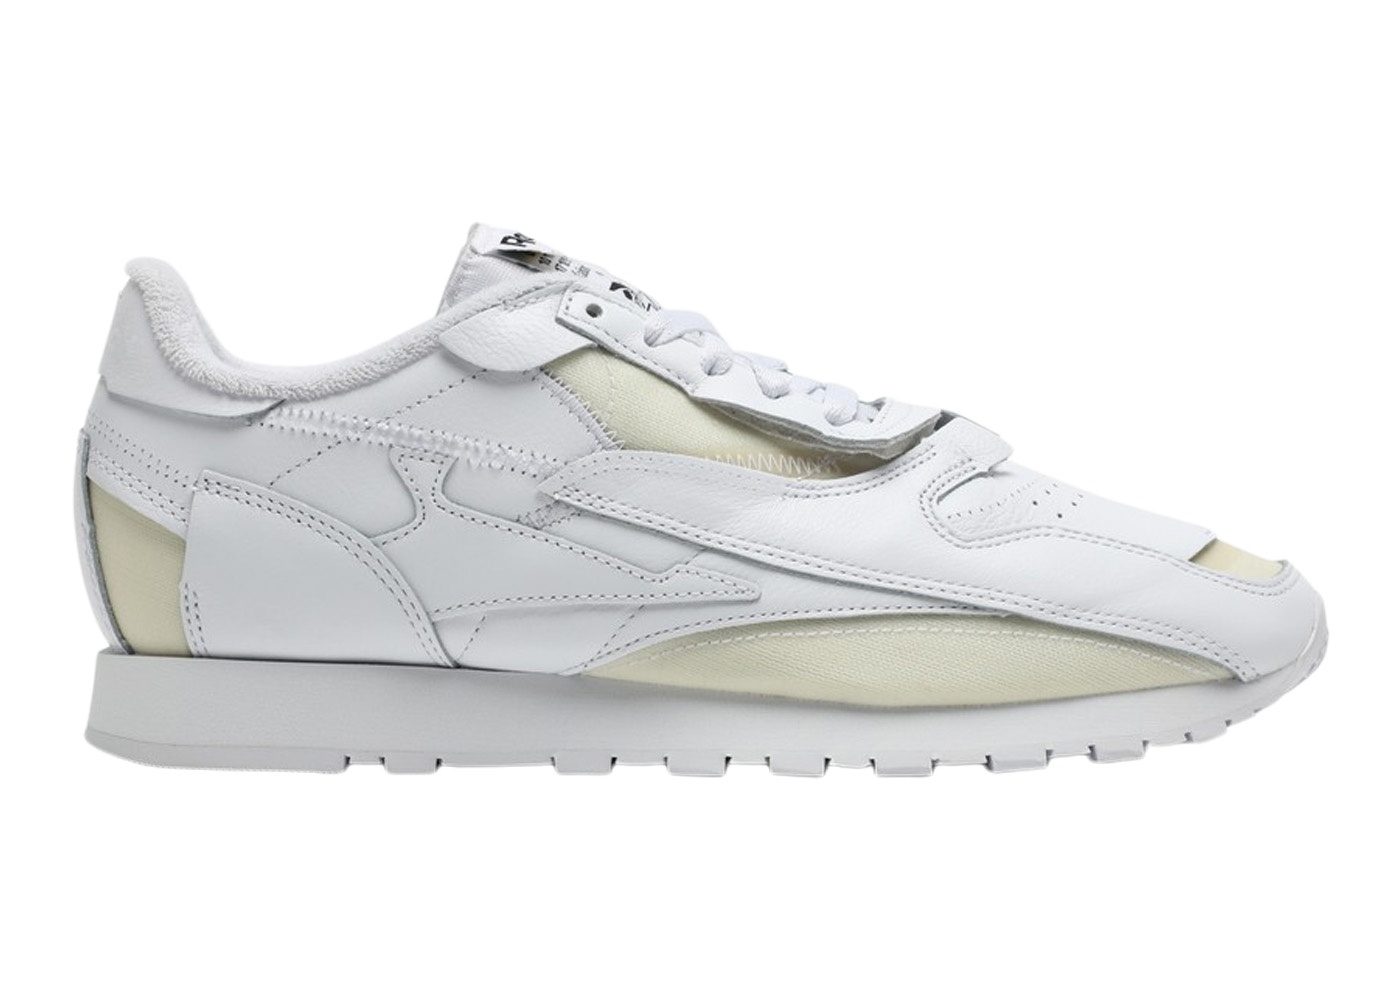 Reebok Classic Leather Re-Co Maison Margiela Project 0 'Memory Of' V2  Footwear White